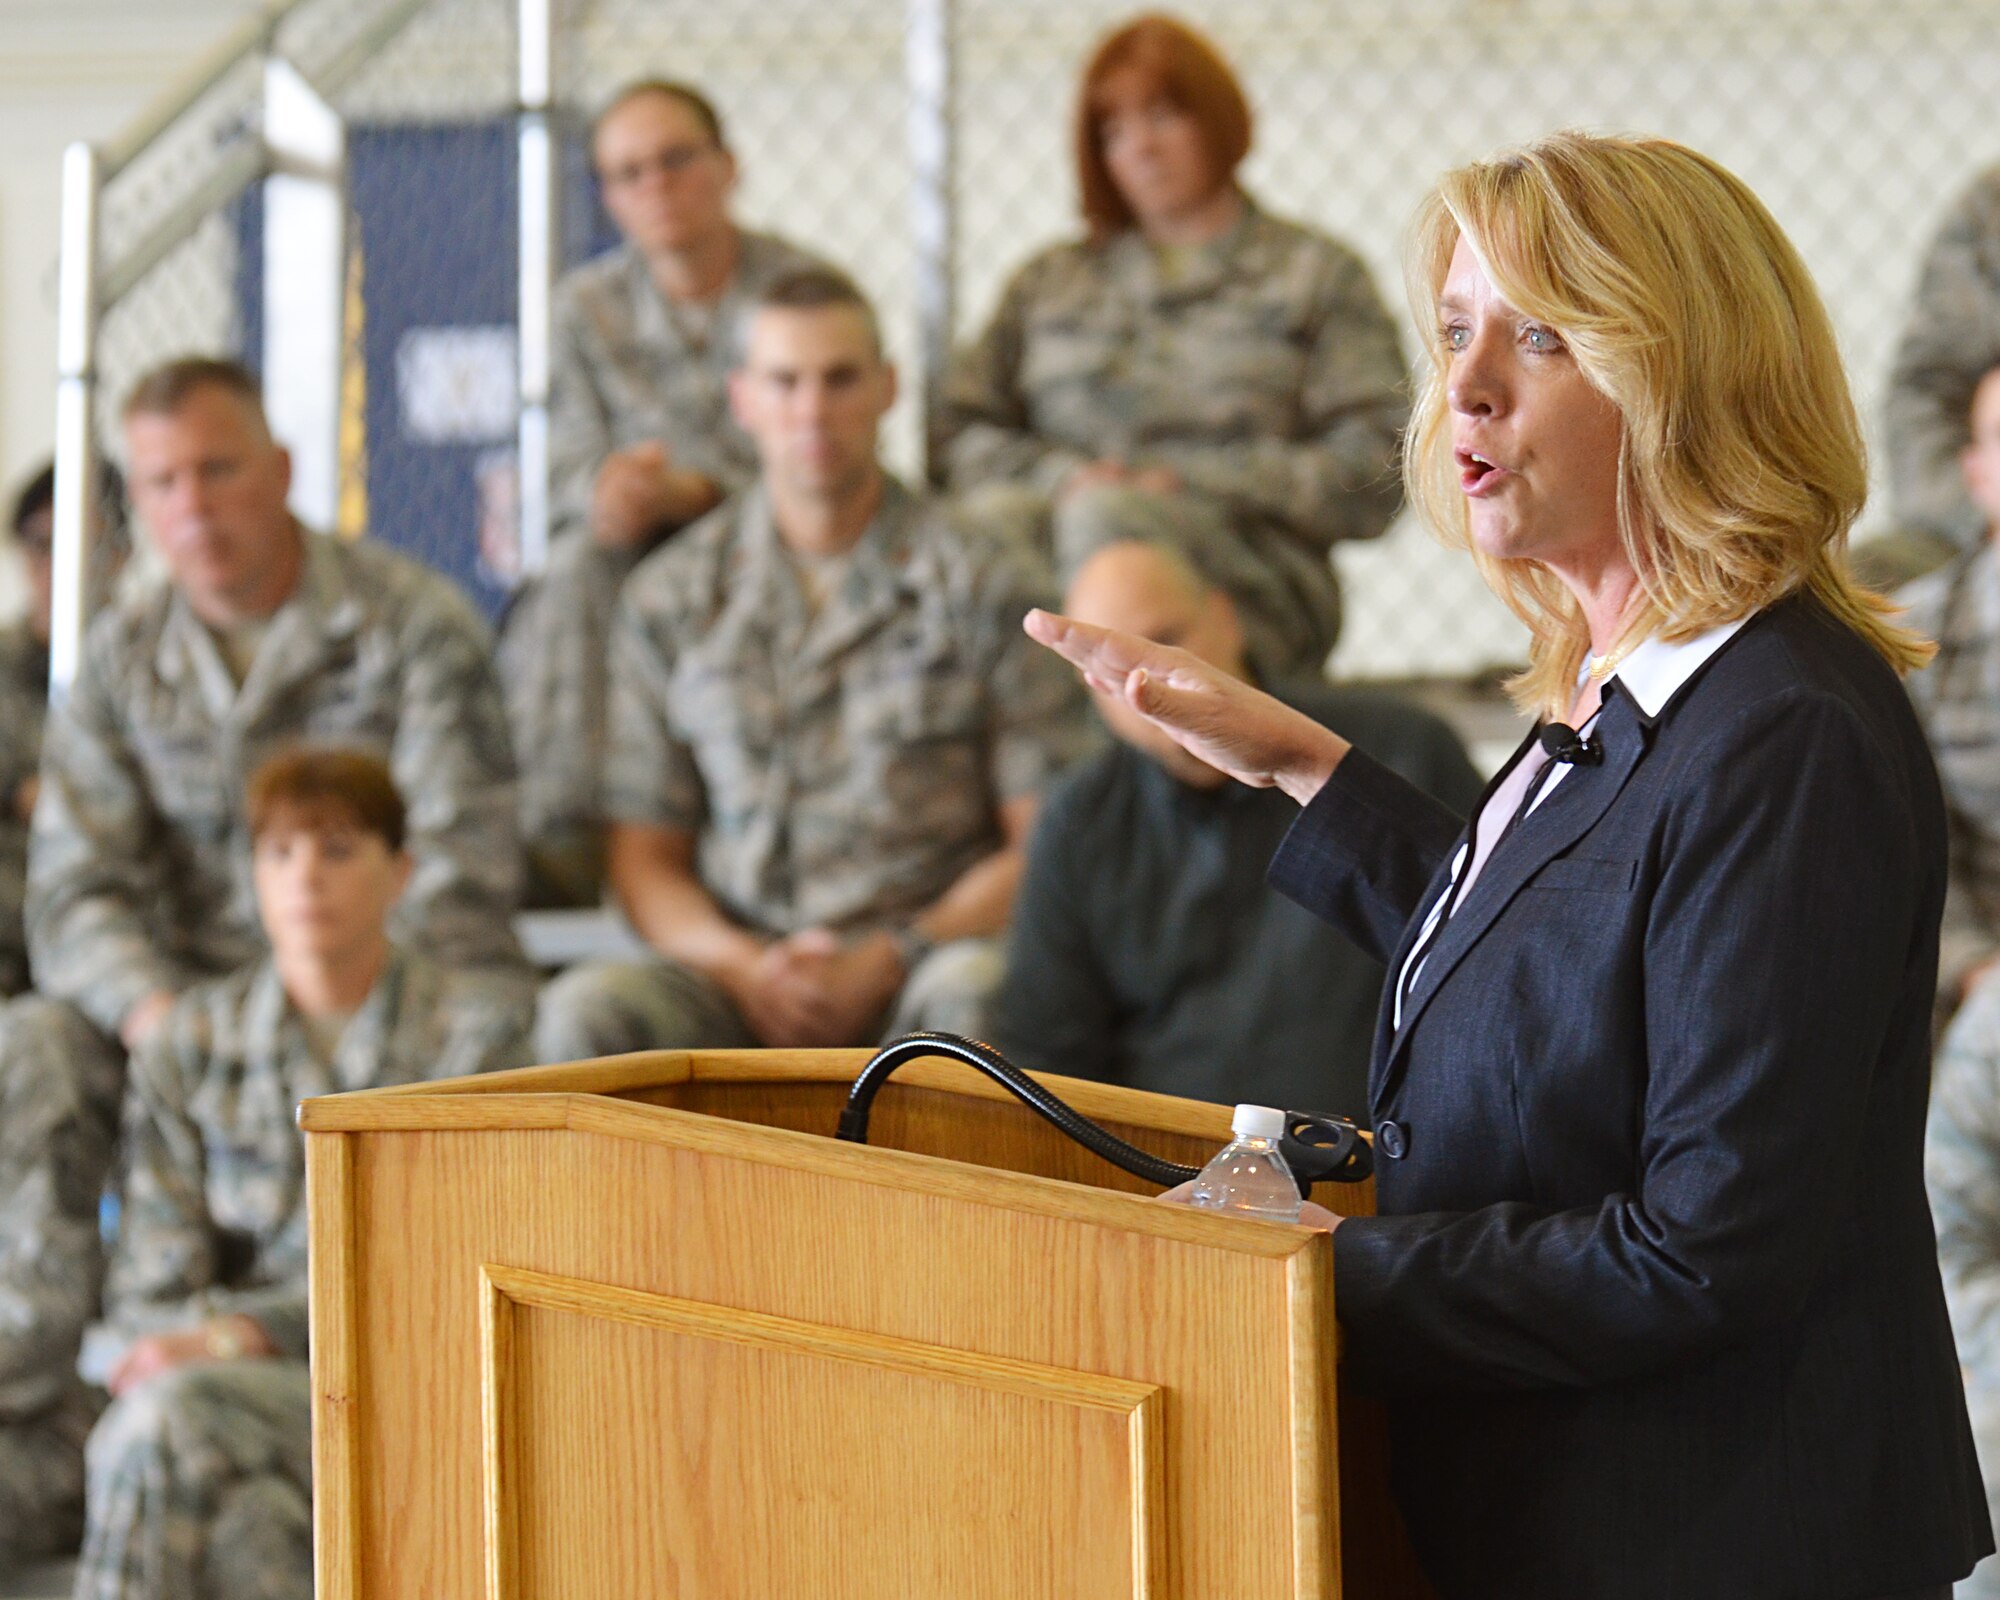 Secretary of the Air Force Deborah Lee James spoke to Airmen and held a question and answer session in the base hangar May 2, 2014, during her visit to Westover Air Reserve Base, Mass. (U.S. Air Force photo/Tech. Sgt. Brian P. Boynton)